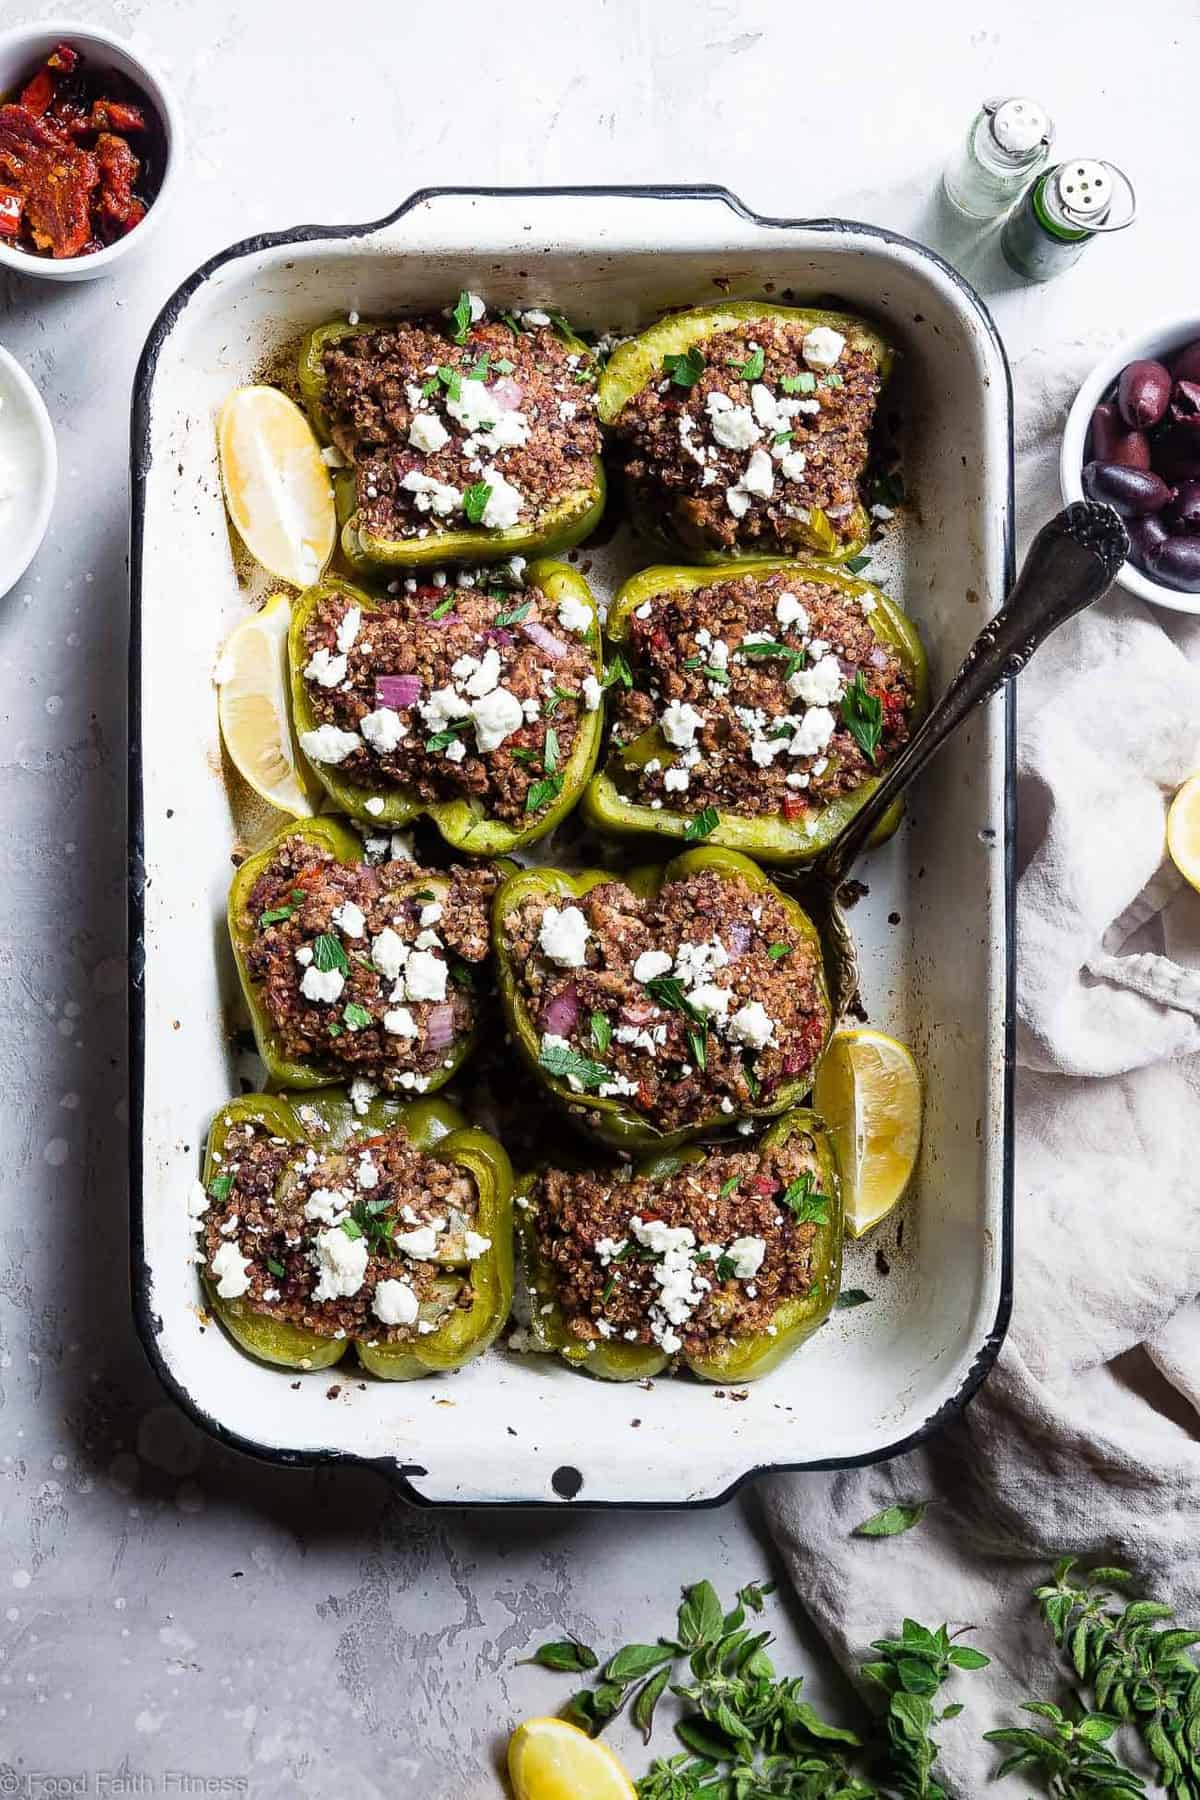 Greek Healthy Turkey Quinoa Stuffed Bell Peppers - These Turkey Quinoa Stuffed Bell Peppers are an easy, crowd-pleasing, weeknight dinner packed with Greek flavors! Healthy, gluten free, dairy free and SO delicious! The best quinoa stuffed peppers recipe! | #Foodfaithfitness | #Glutenfree #Healthy #Quinoa #Dairyfree #Dinner